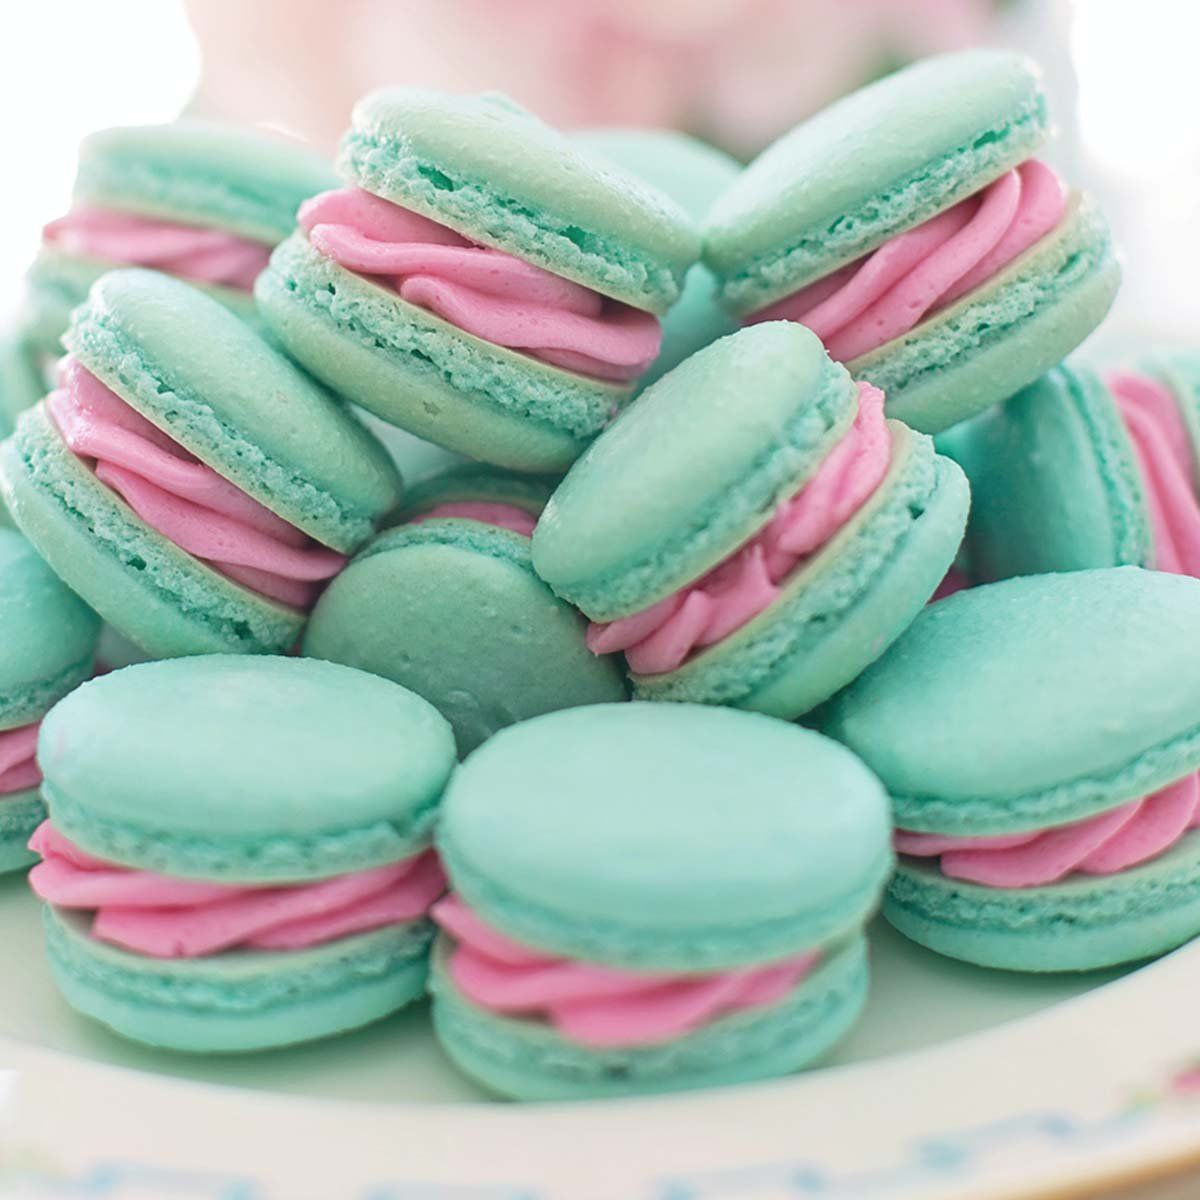 Discover What Are Macarons? 9 Authoritative Facts about Macarons